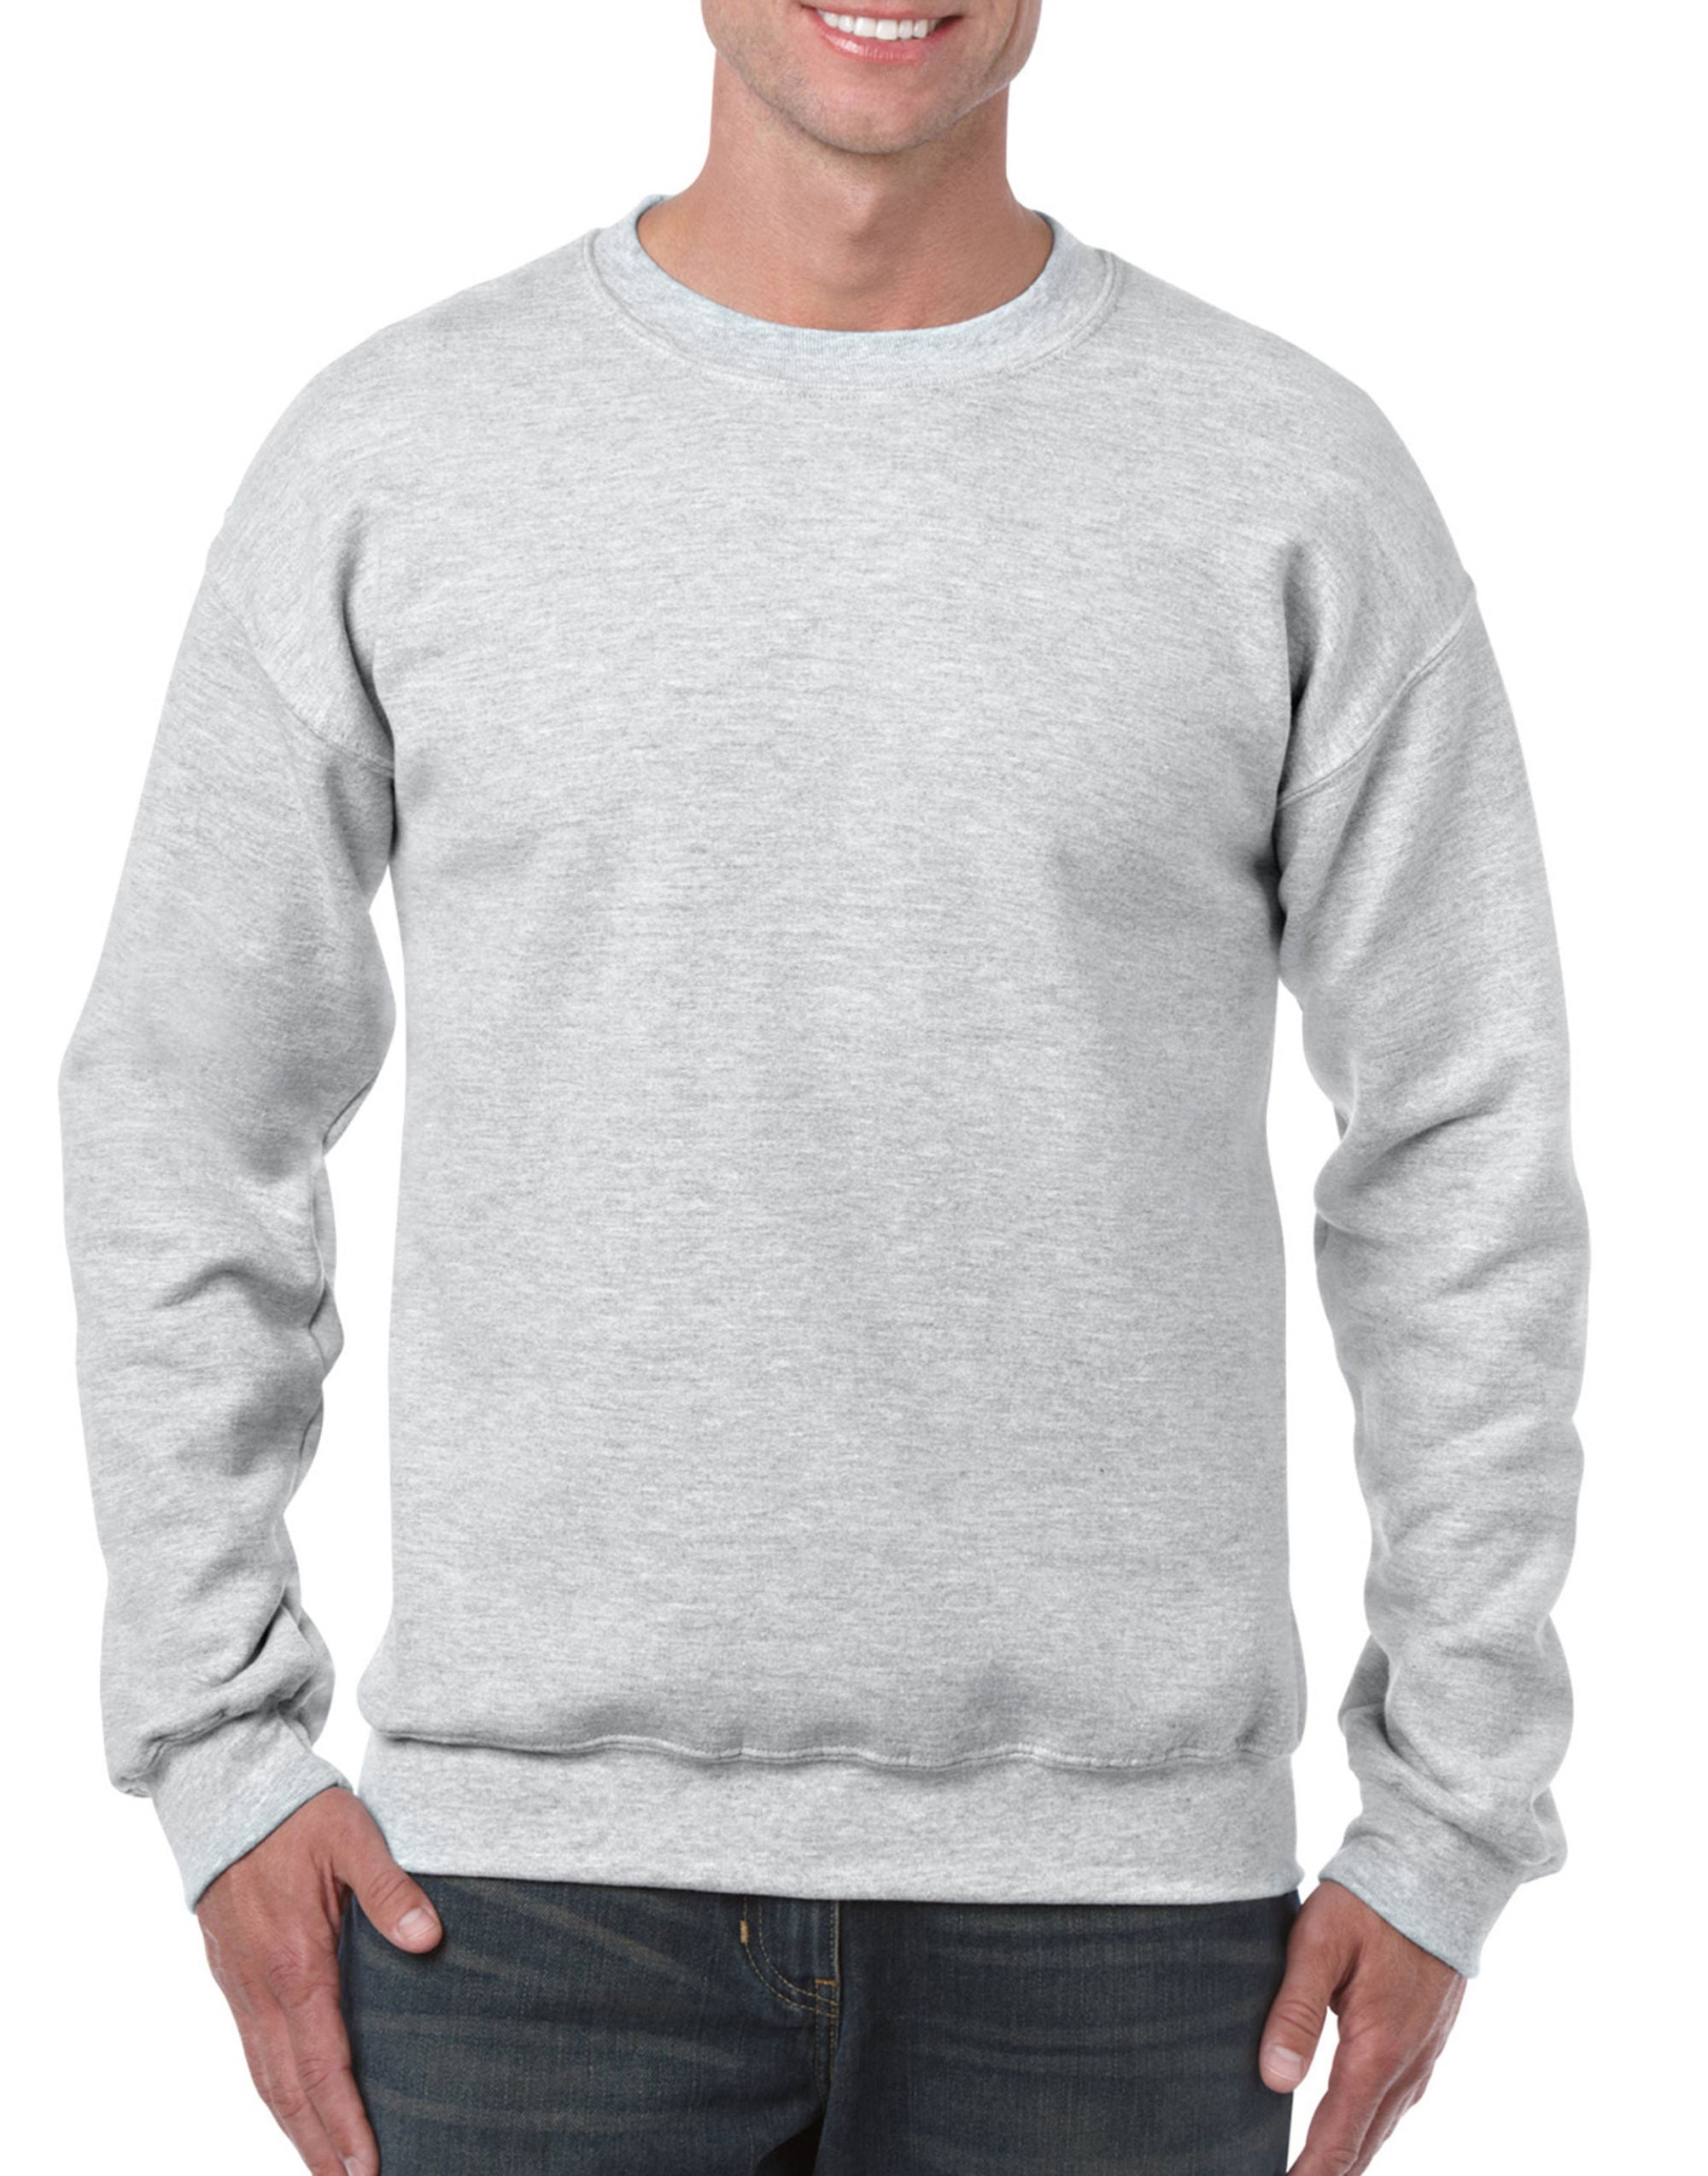 25 x Sweatshirts with Embroidered LOGO Front & Back